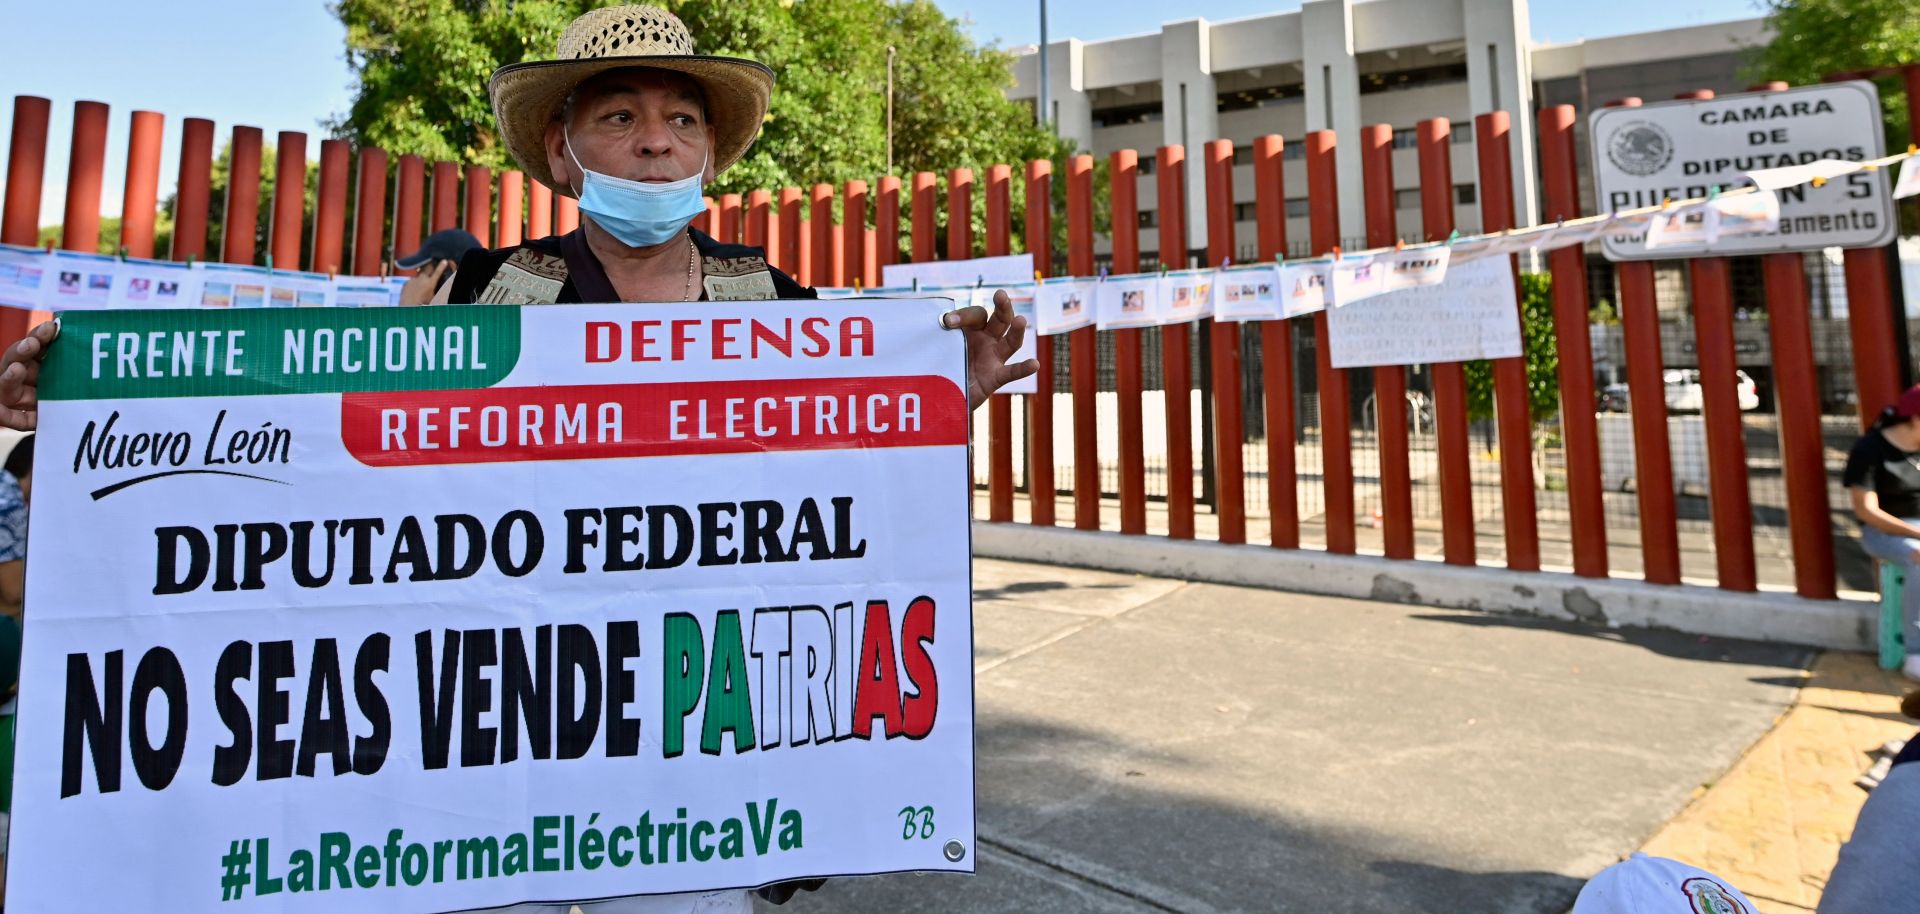 A demonstrator in Mexico City holds a sign in favor of President Andres Manuel Lopez Obrador's proposed electricity reform outside the building housing Mexico's Chamber of Deputies on April 17, 2022, as lawmakers hold a vote on the legislation. 